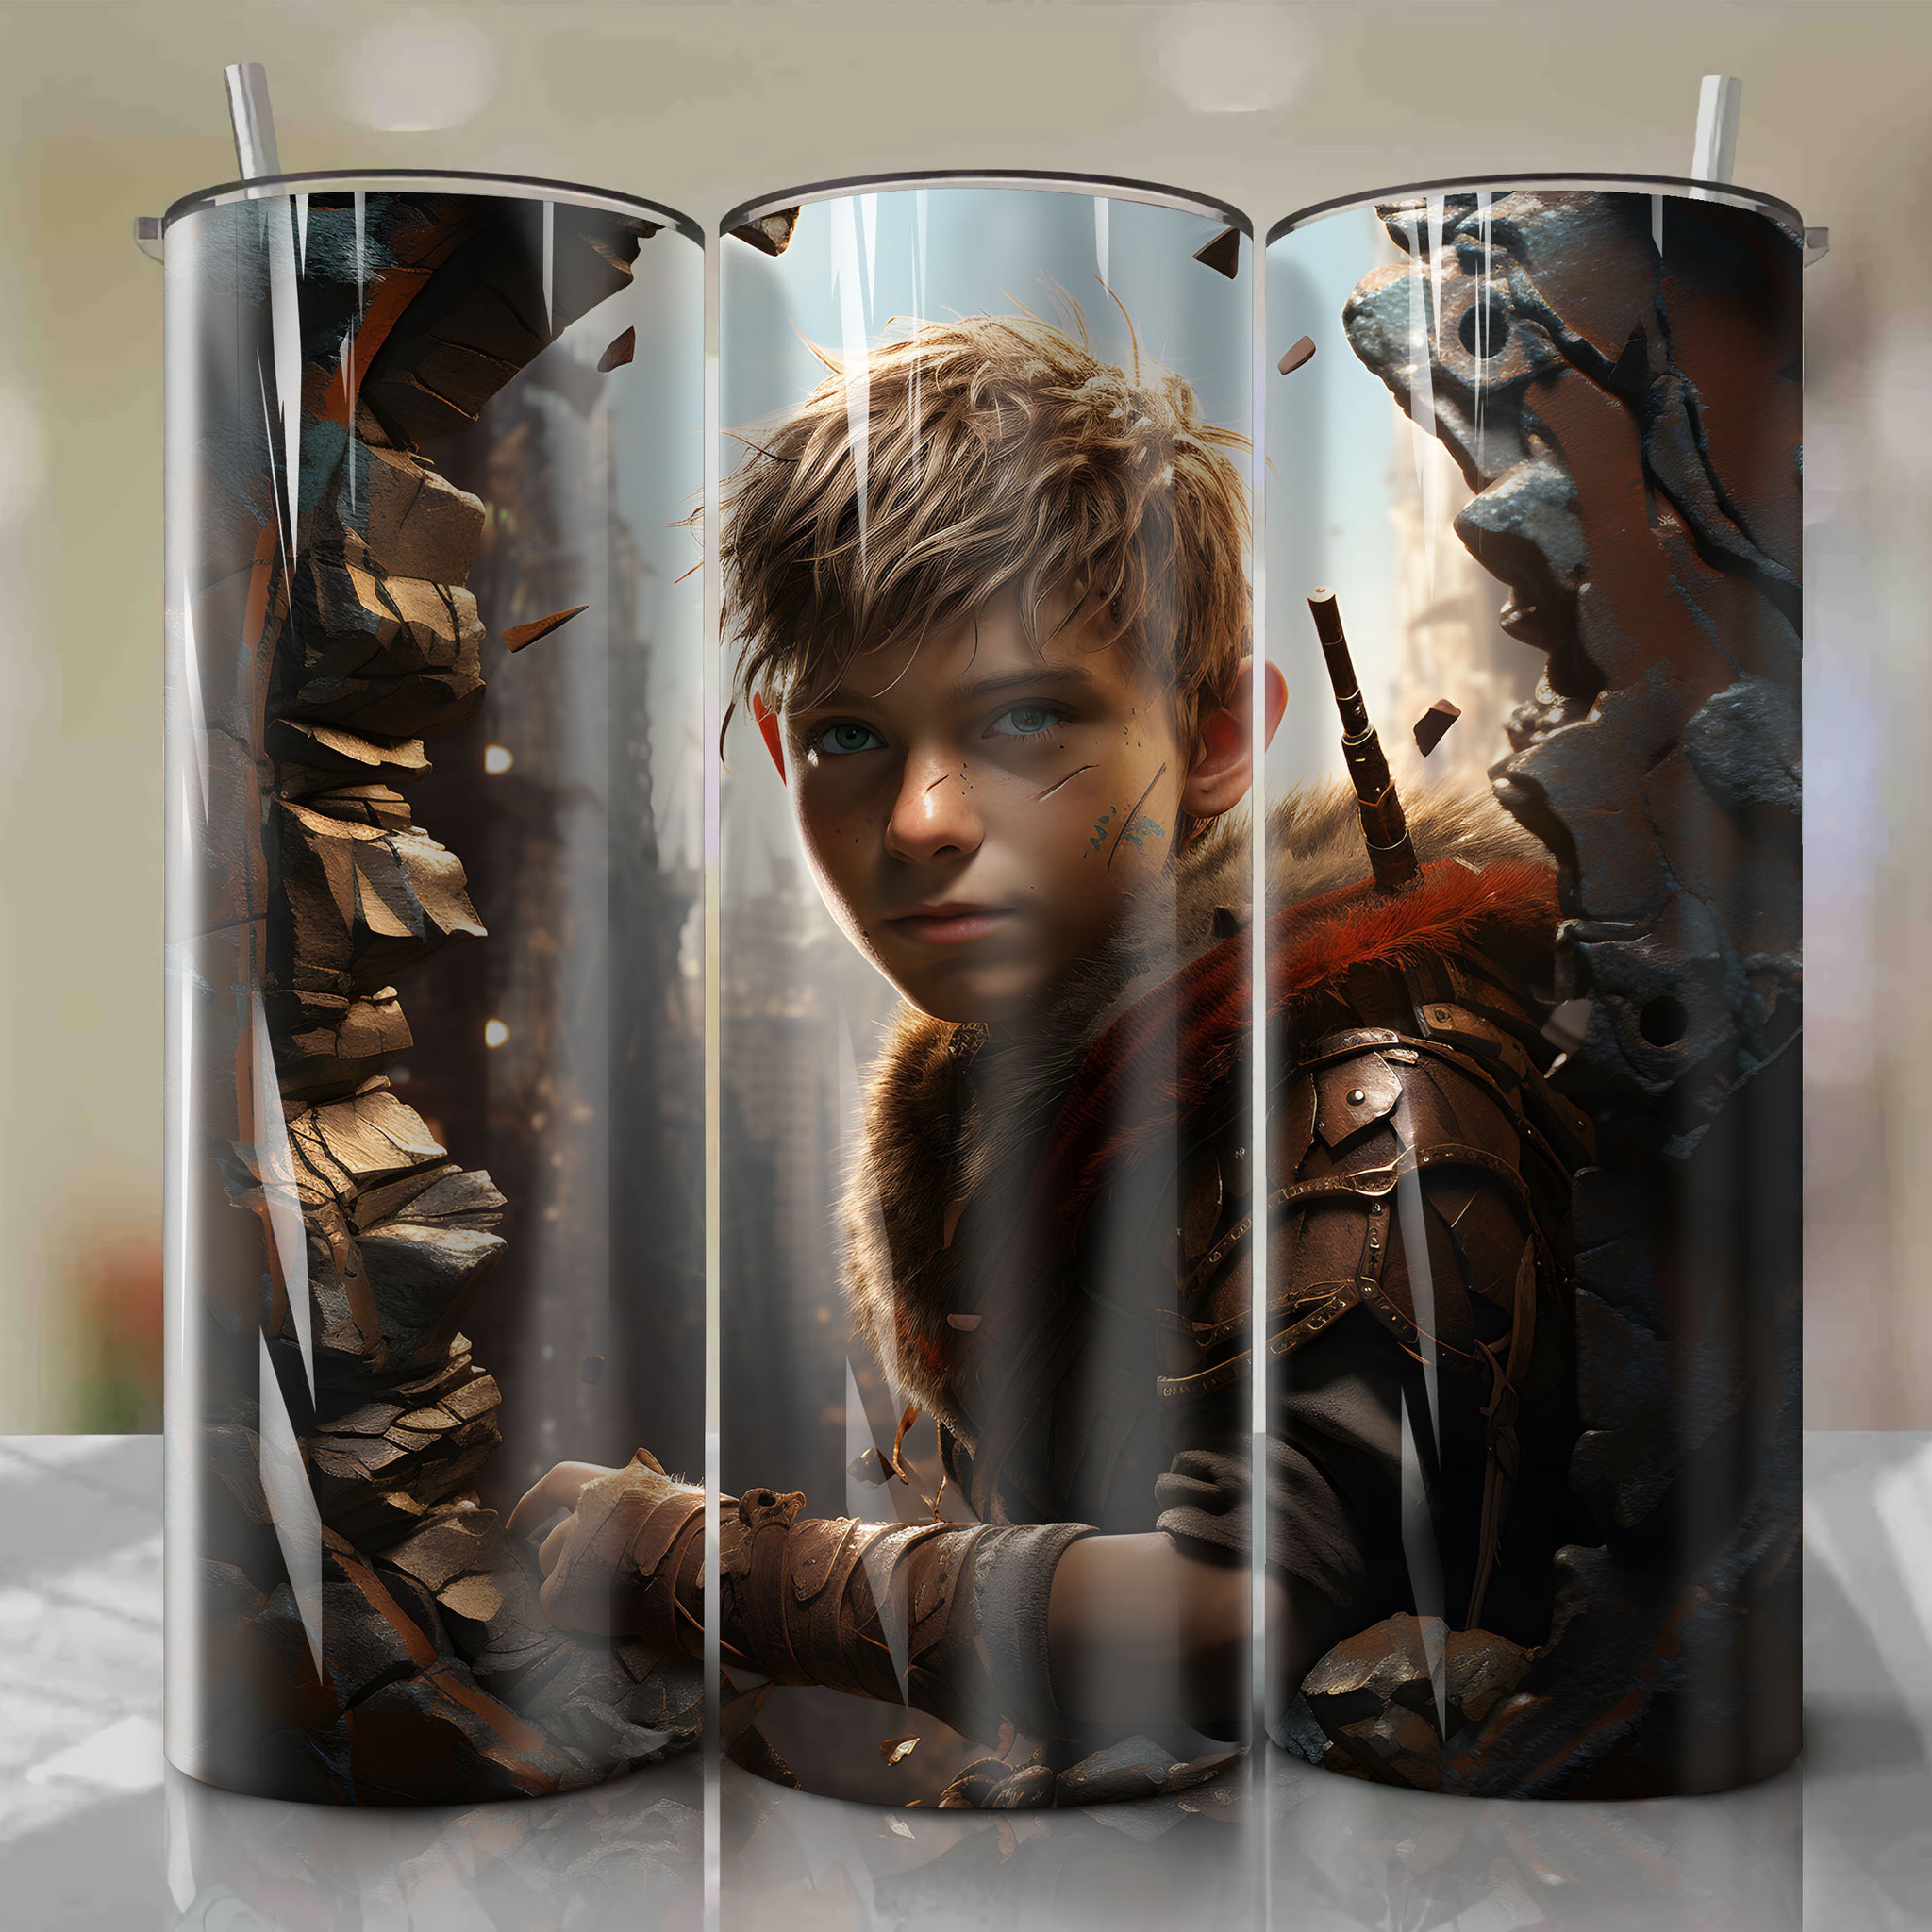 20 Oz Tumbler Wrap - Atreus from God of War in a Captivating Norse World
